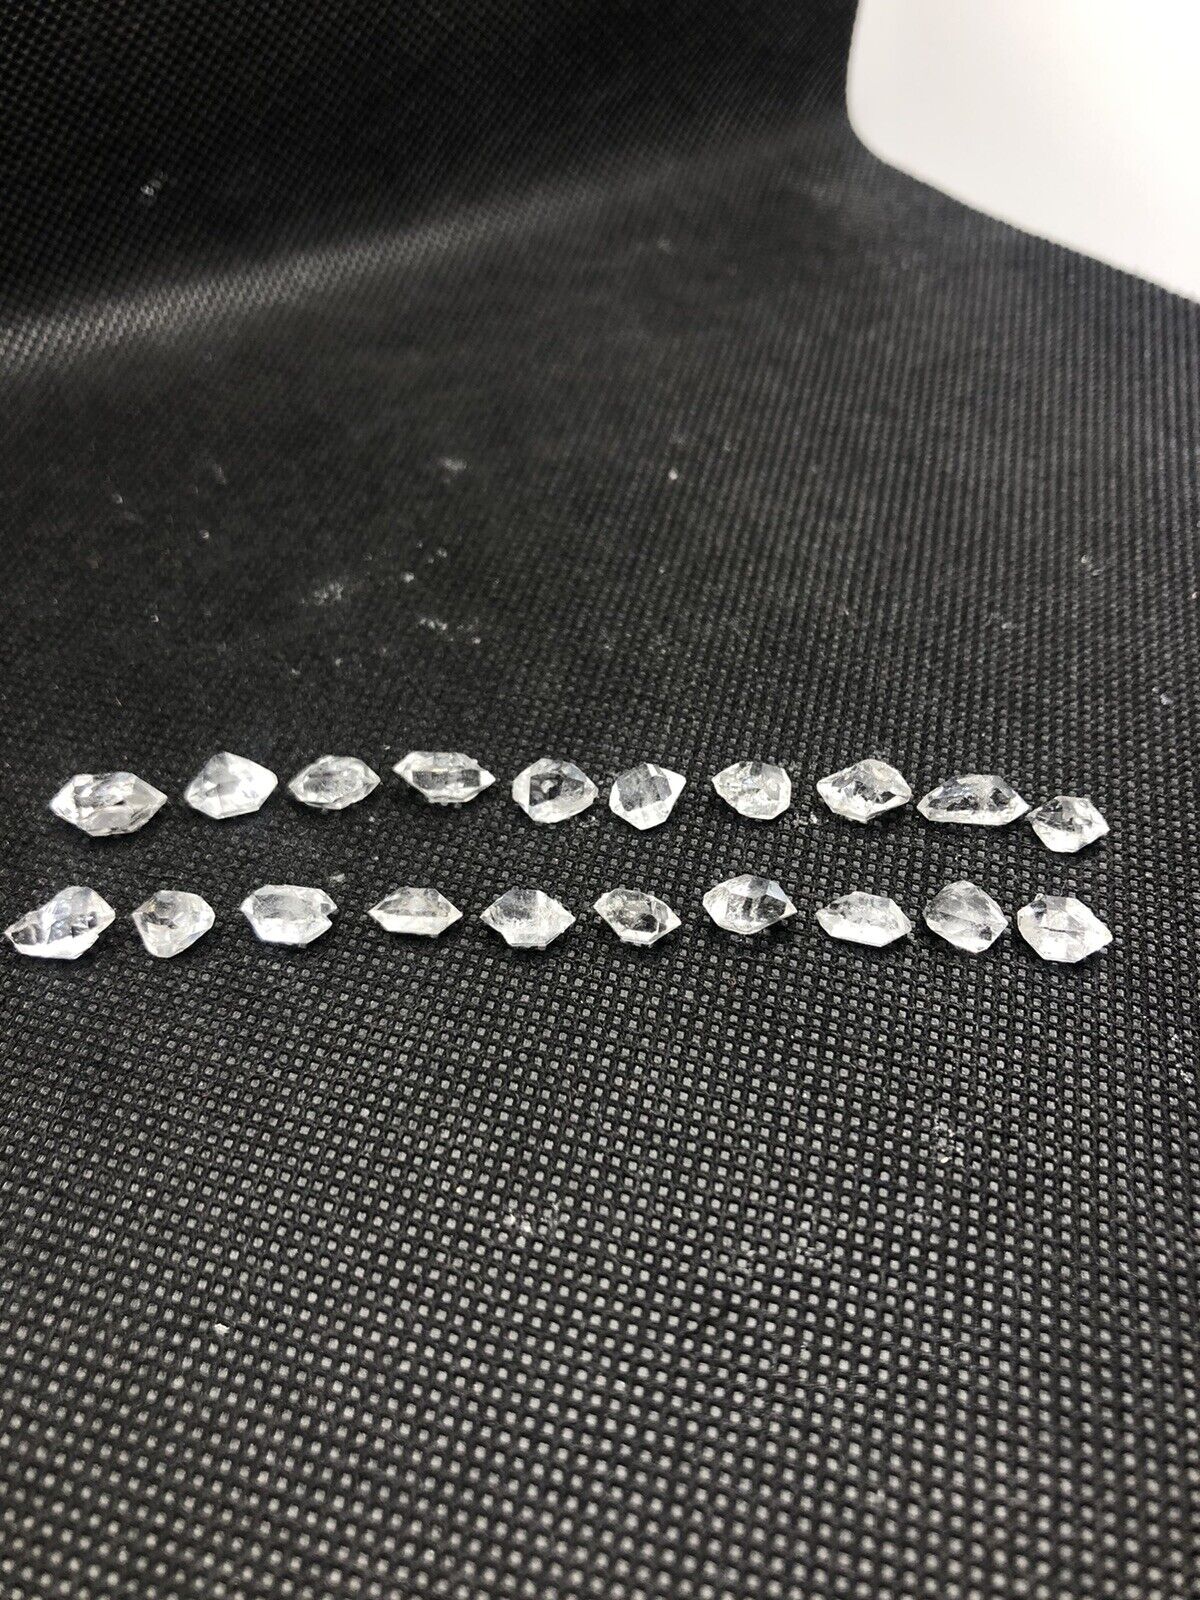 20 Pieces Natural Double Terminated Clear herkimer diamond quartz Crystals